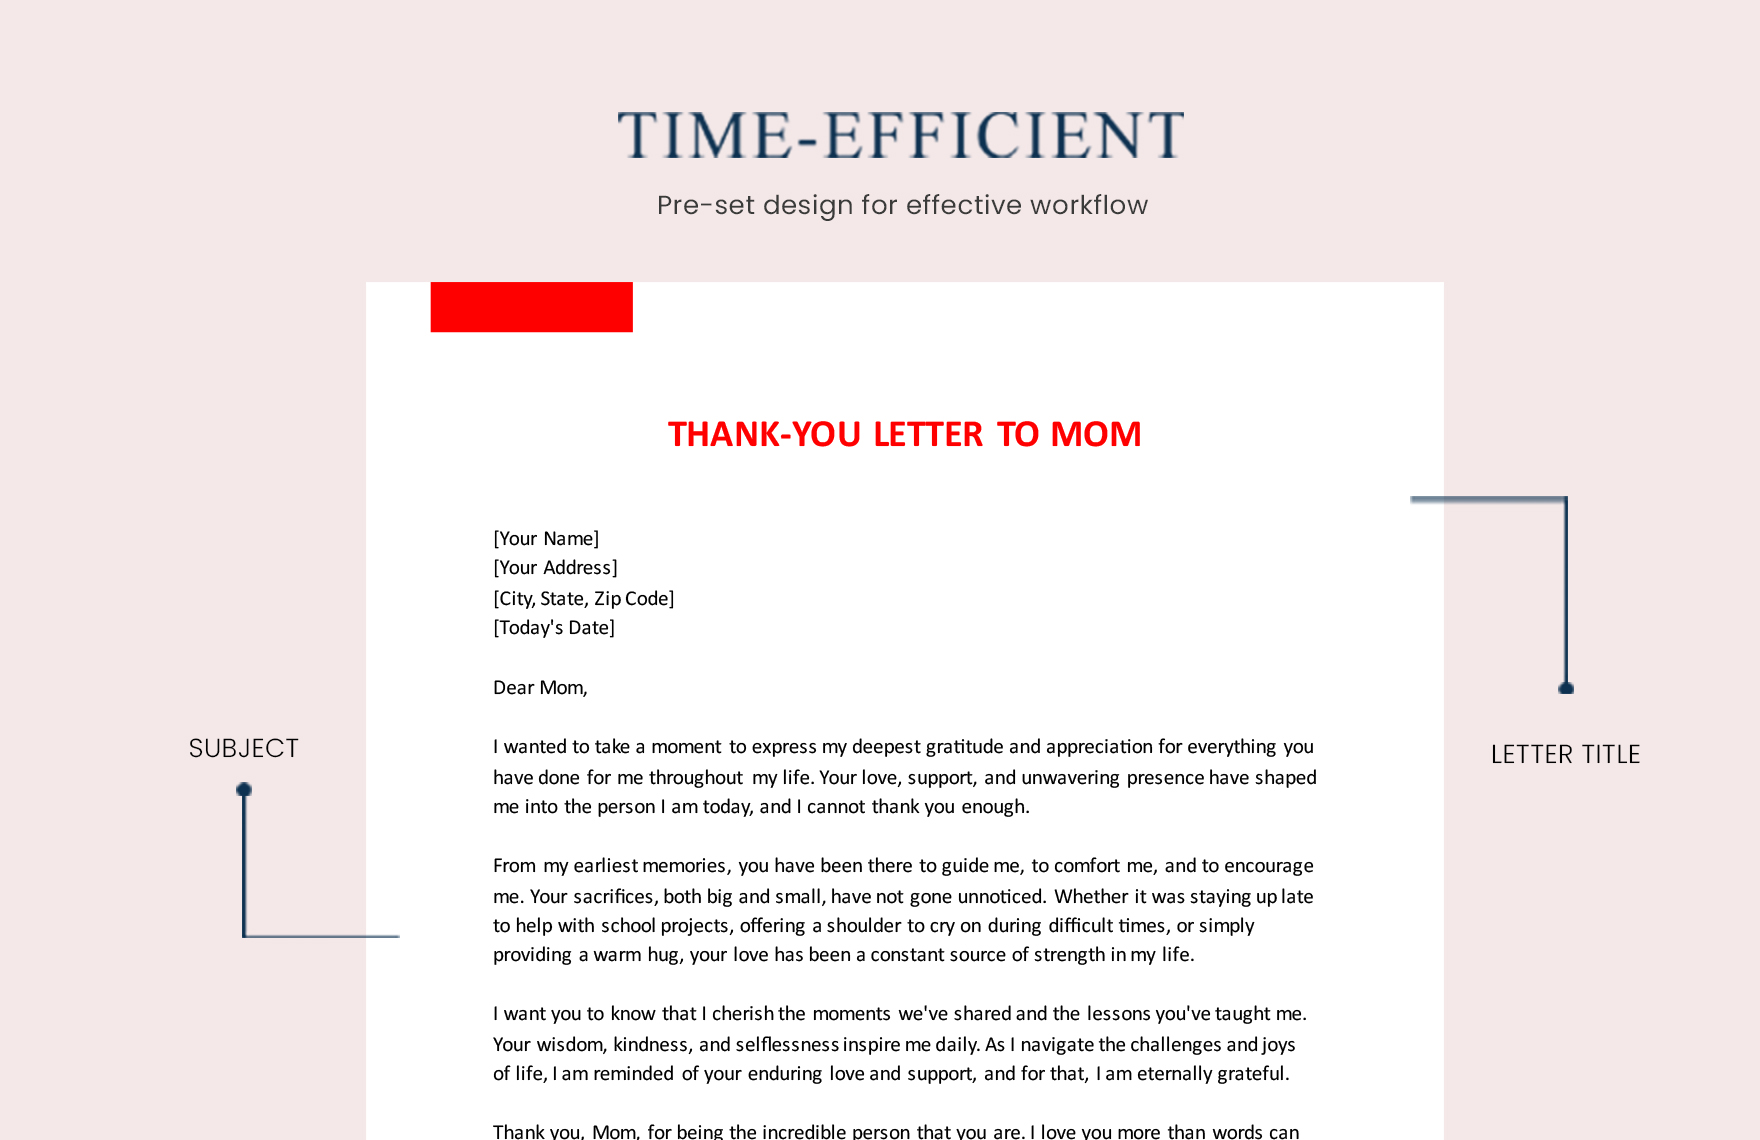 Thank-You Letter to Mom